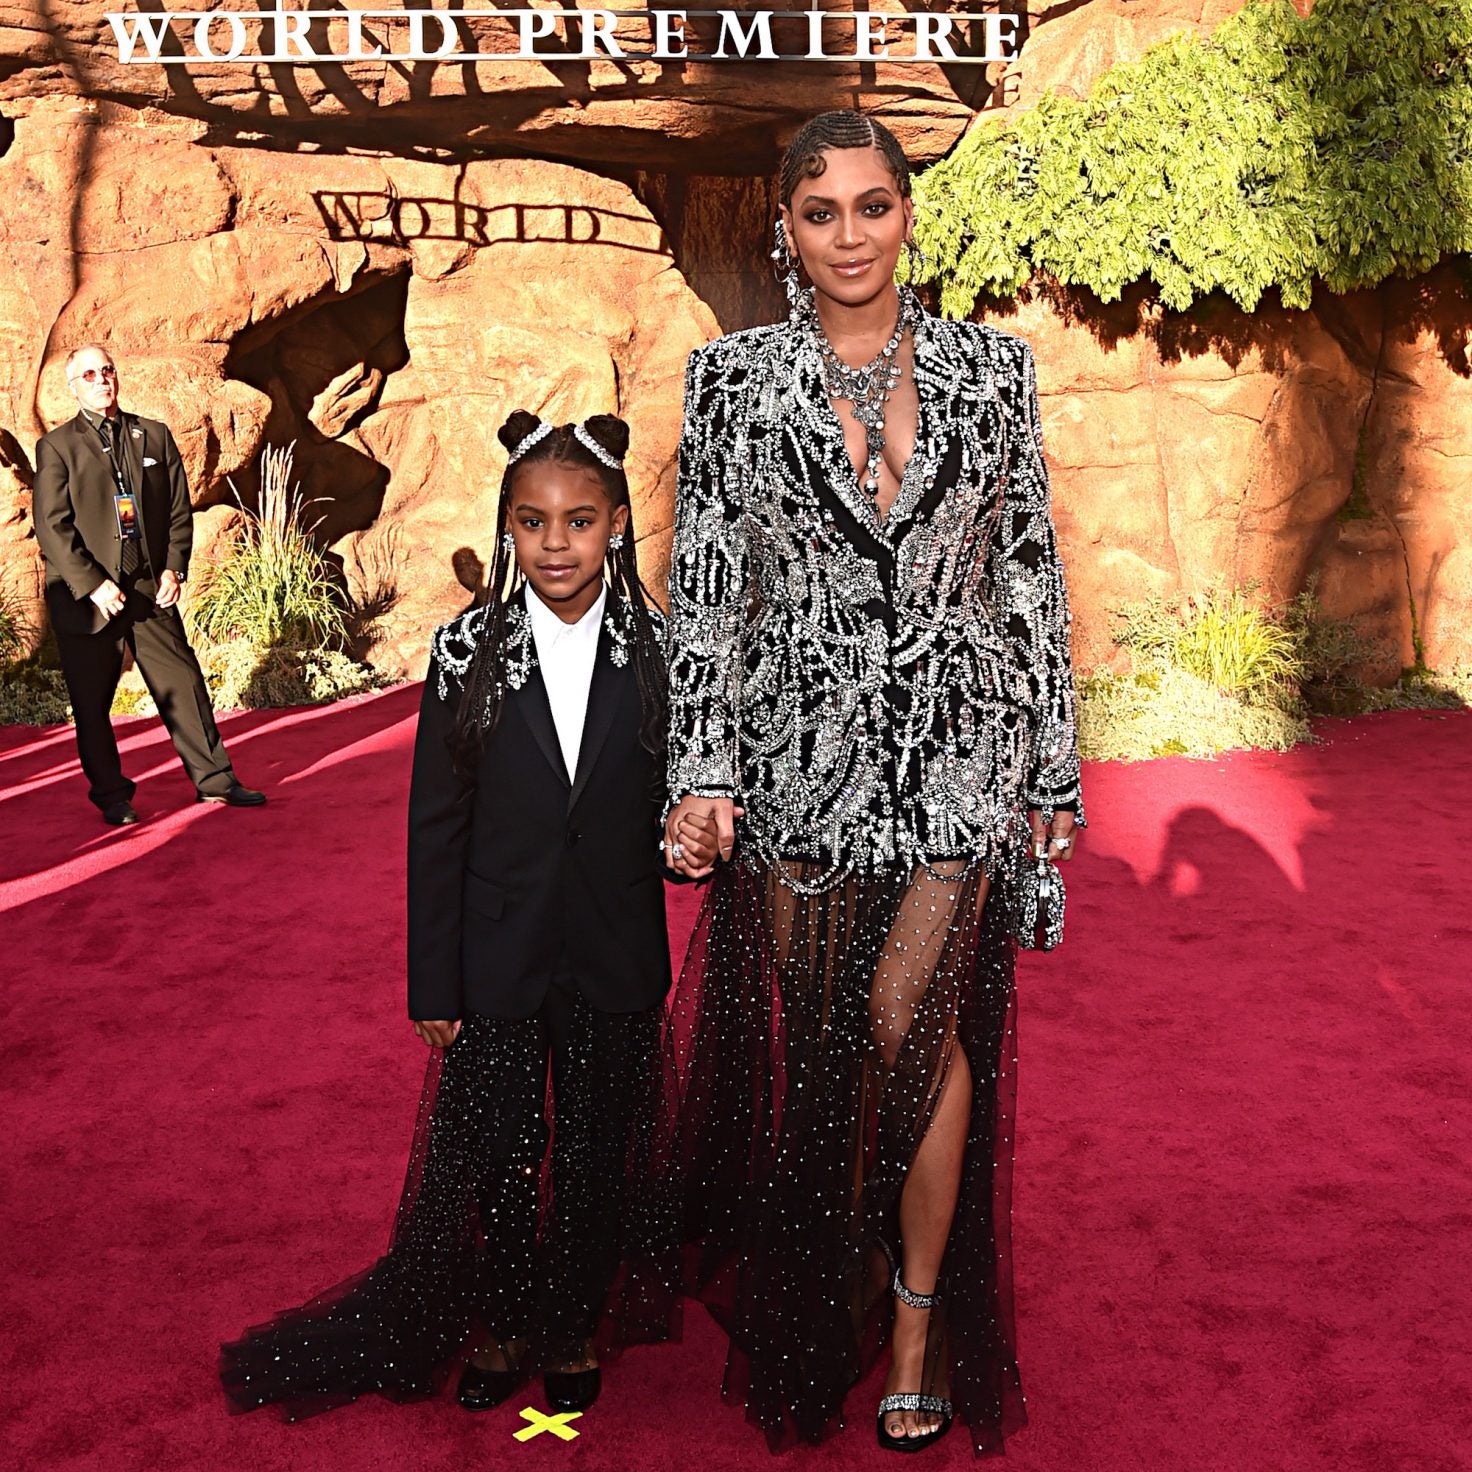 Blue Ivy Carter Wins Her First NAACP Image Award For “Brown Skin Girl”